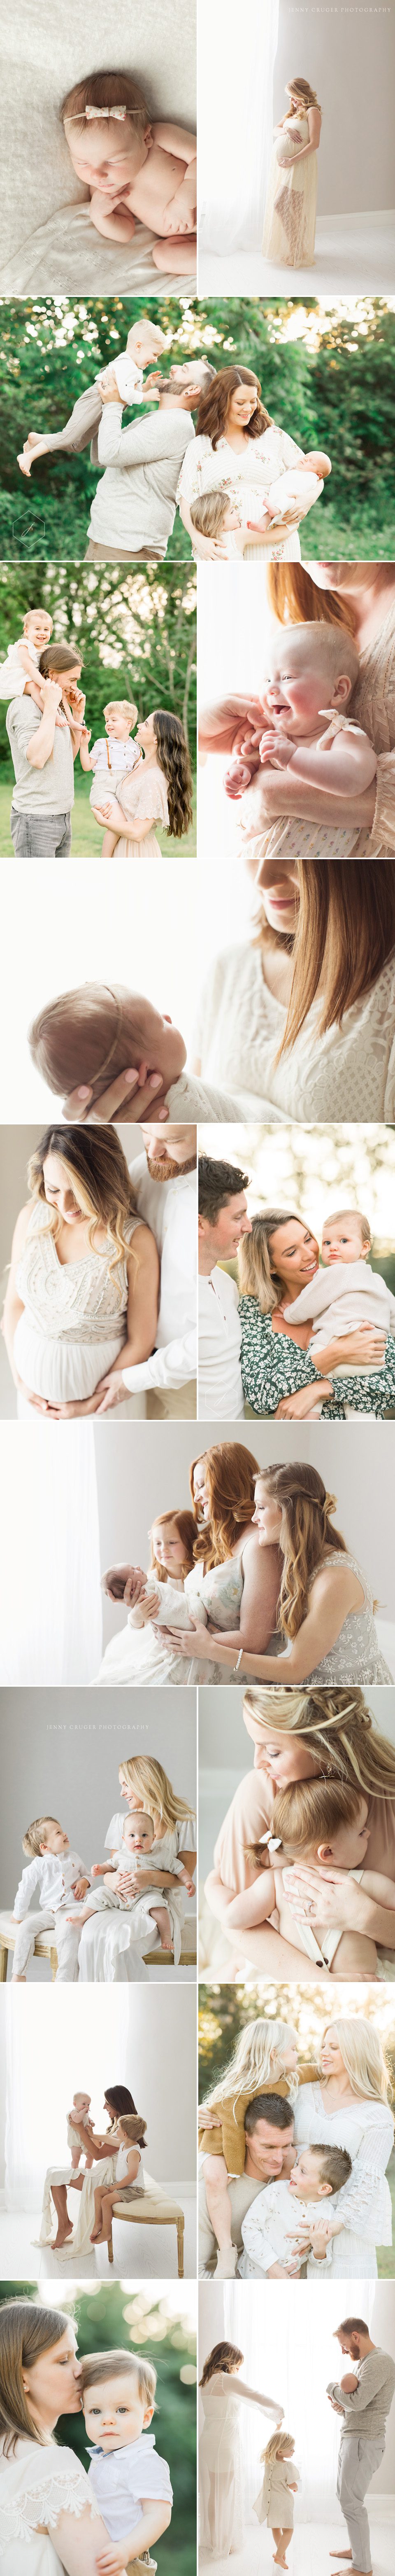 nashville maternity photographer indoor maternity pictures 